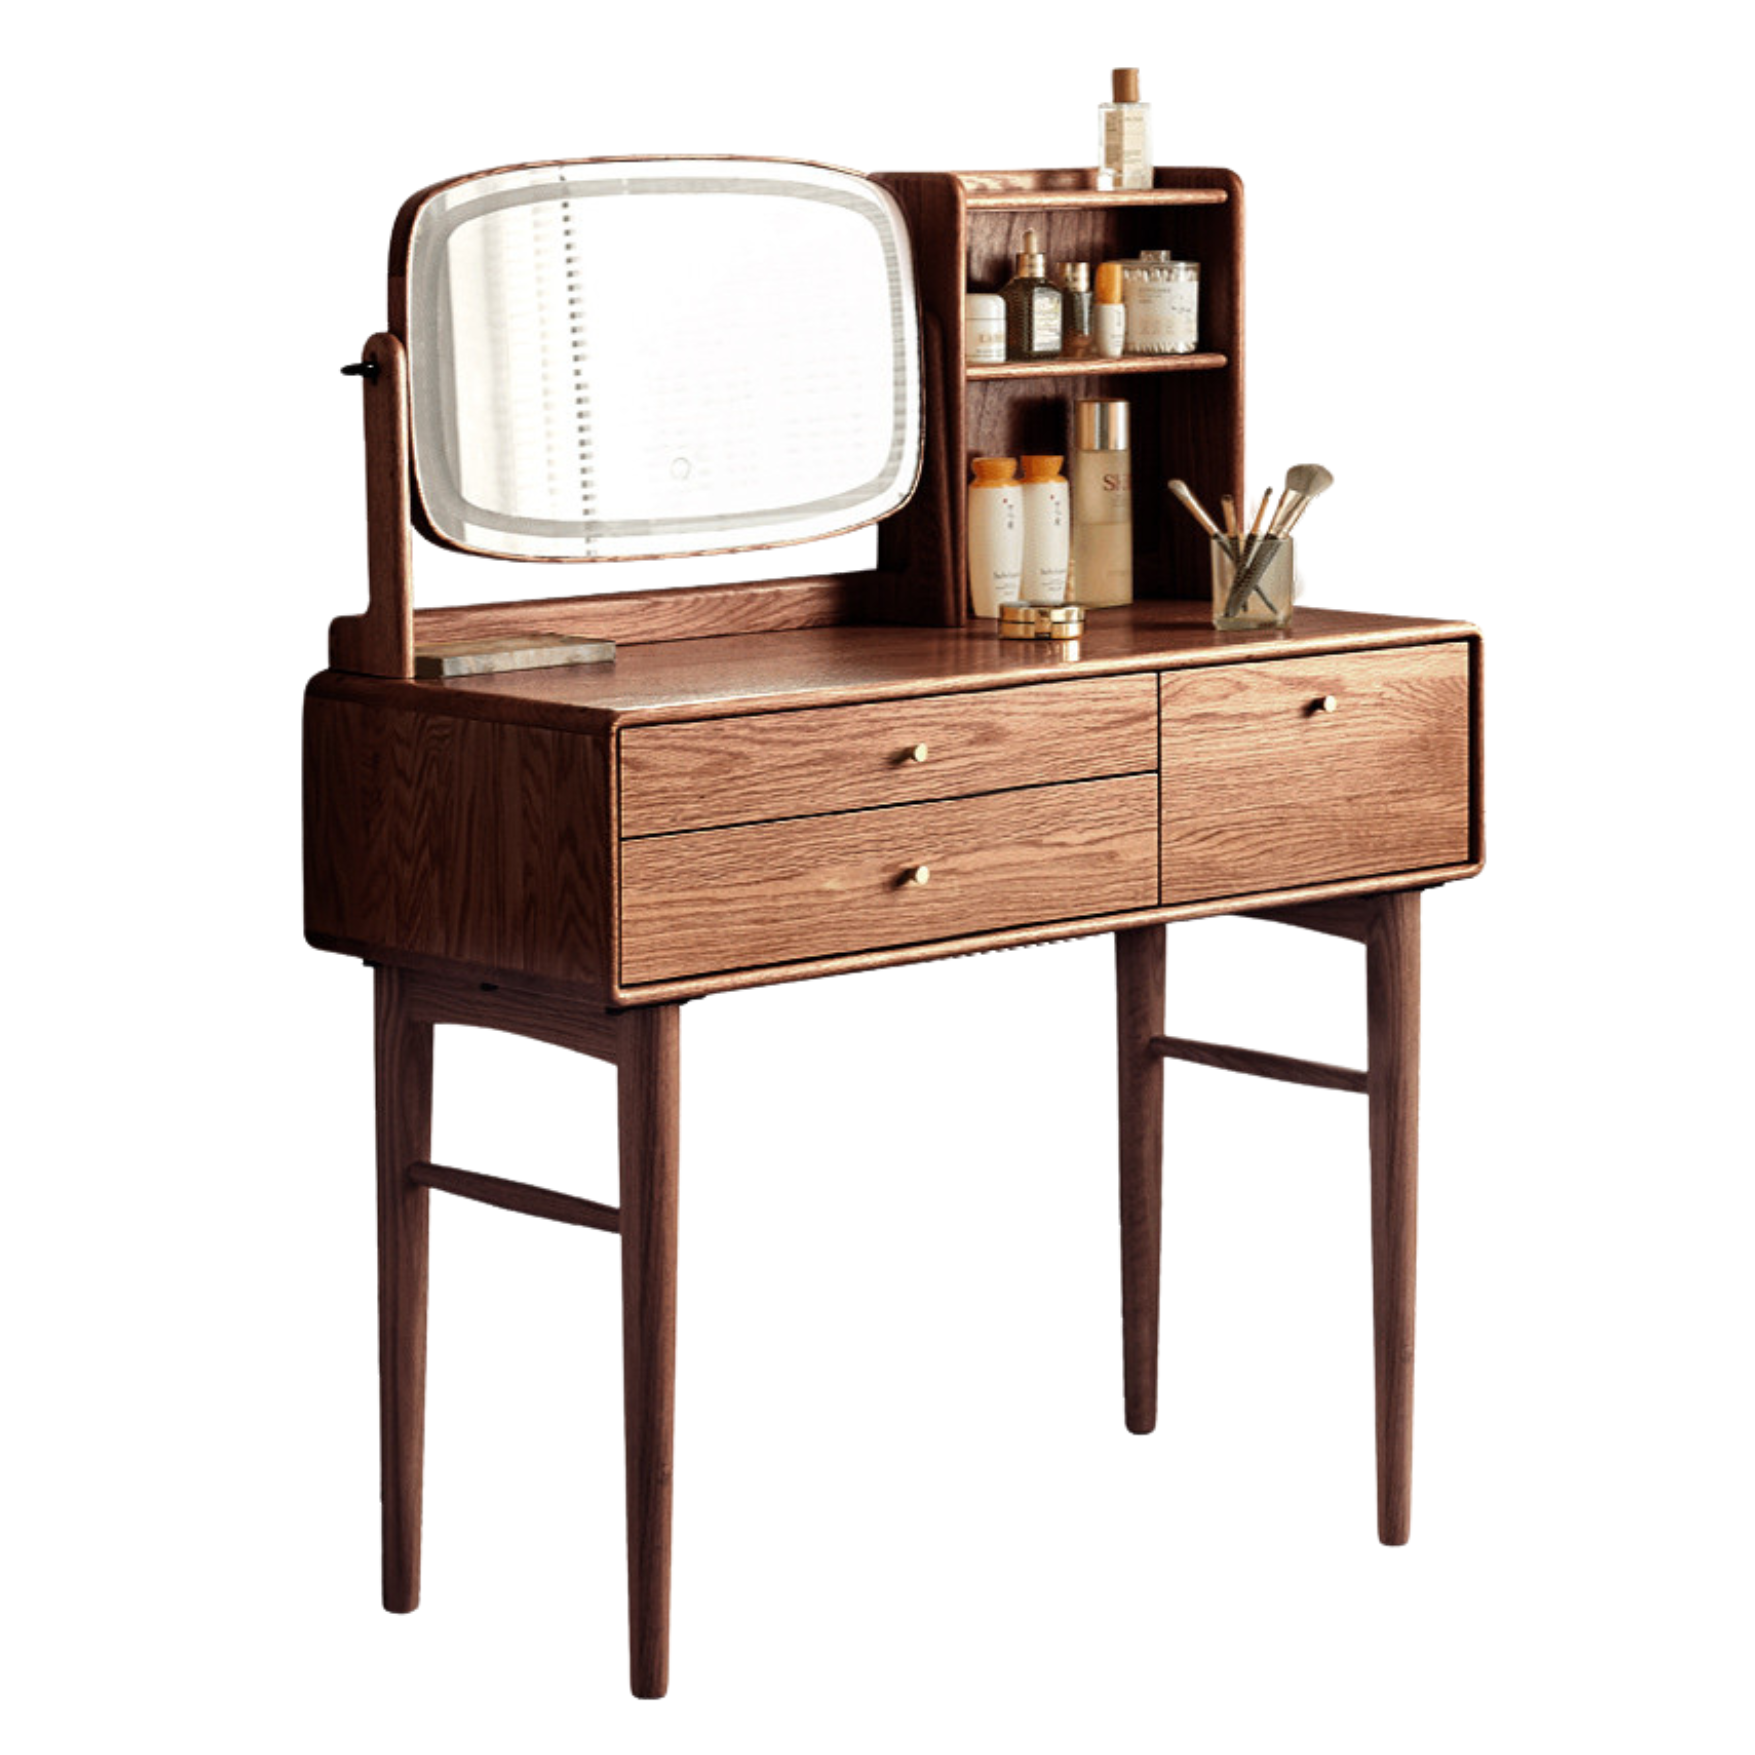 Oak solid wood Dressing table lighted makeup mirror: